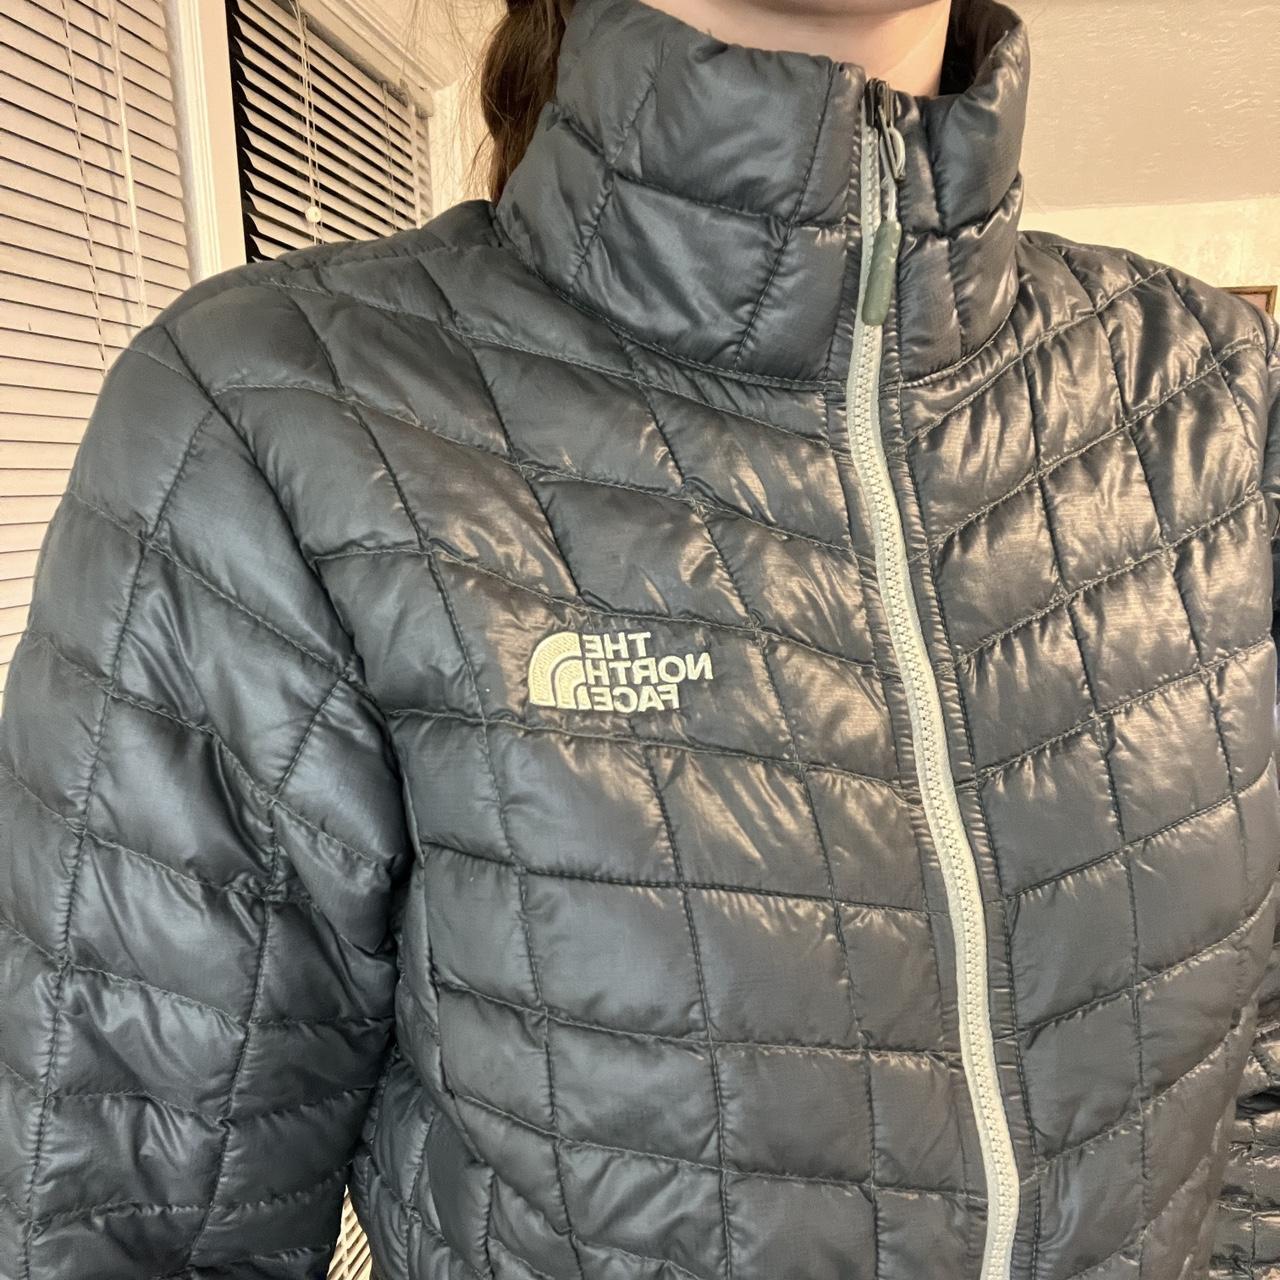 North face puffy thermal coat olive color /... - Depop